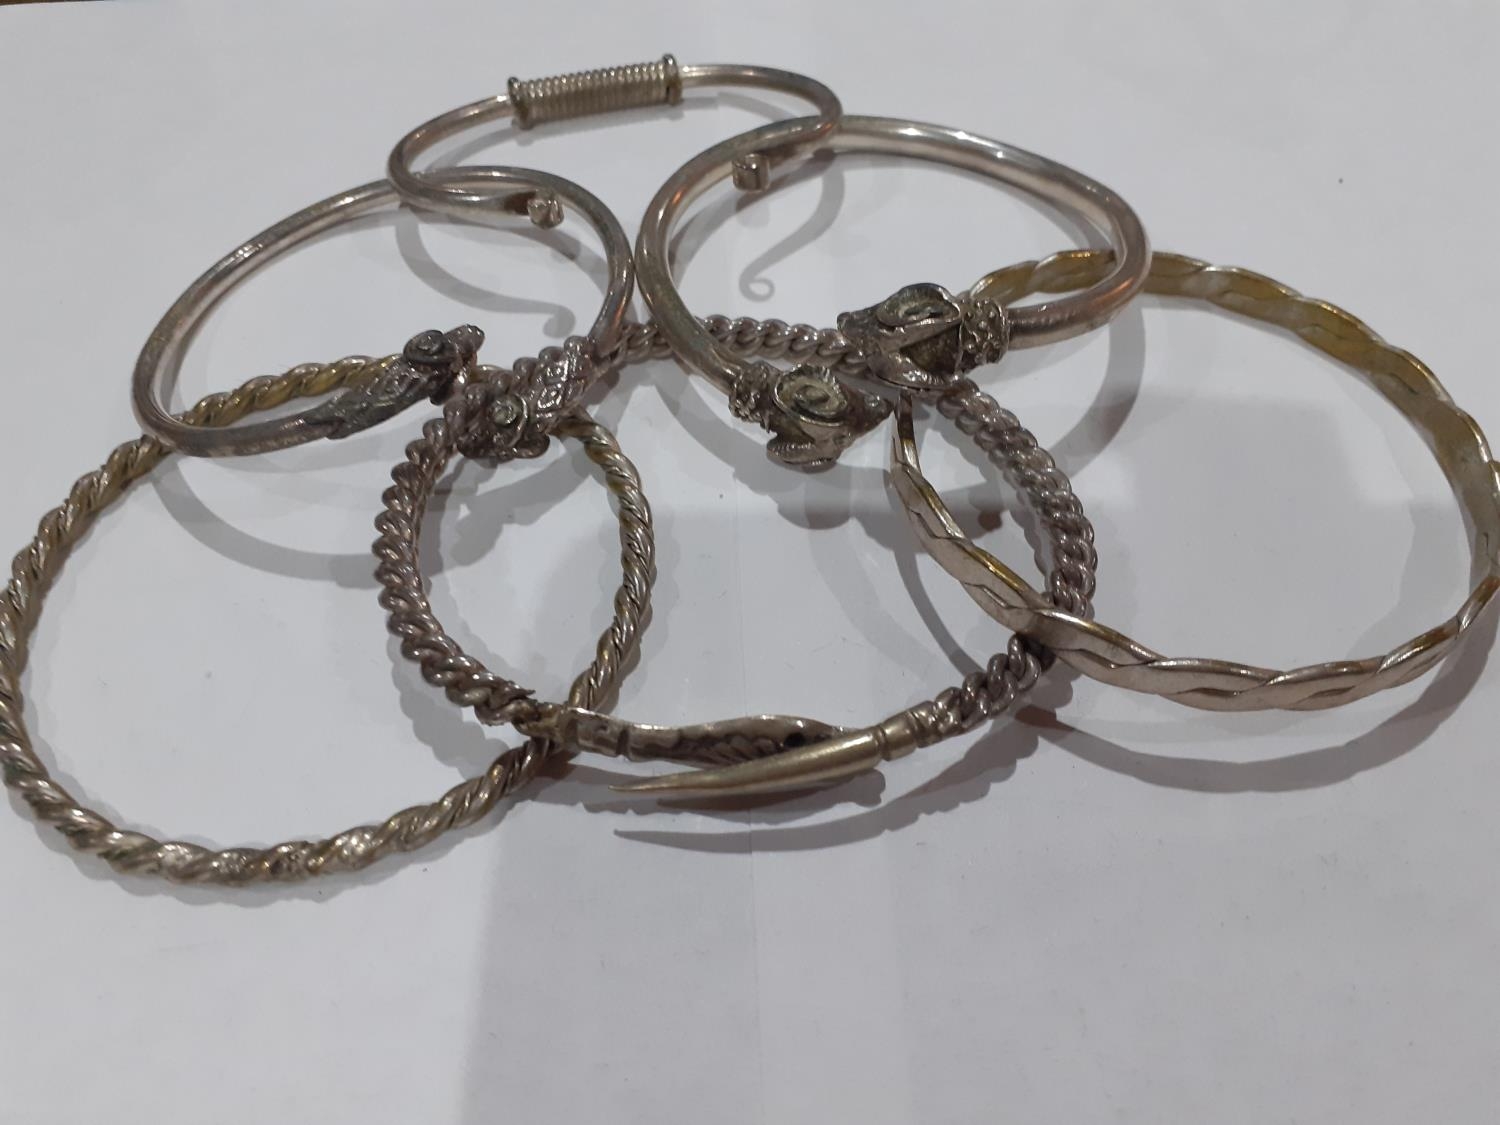 Eastern white metal and silver and other metallic bangles to include ornate bangles with snake, - Image 4 of 12